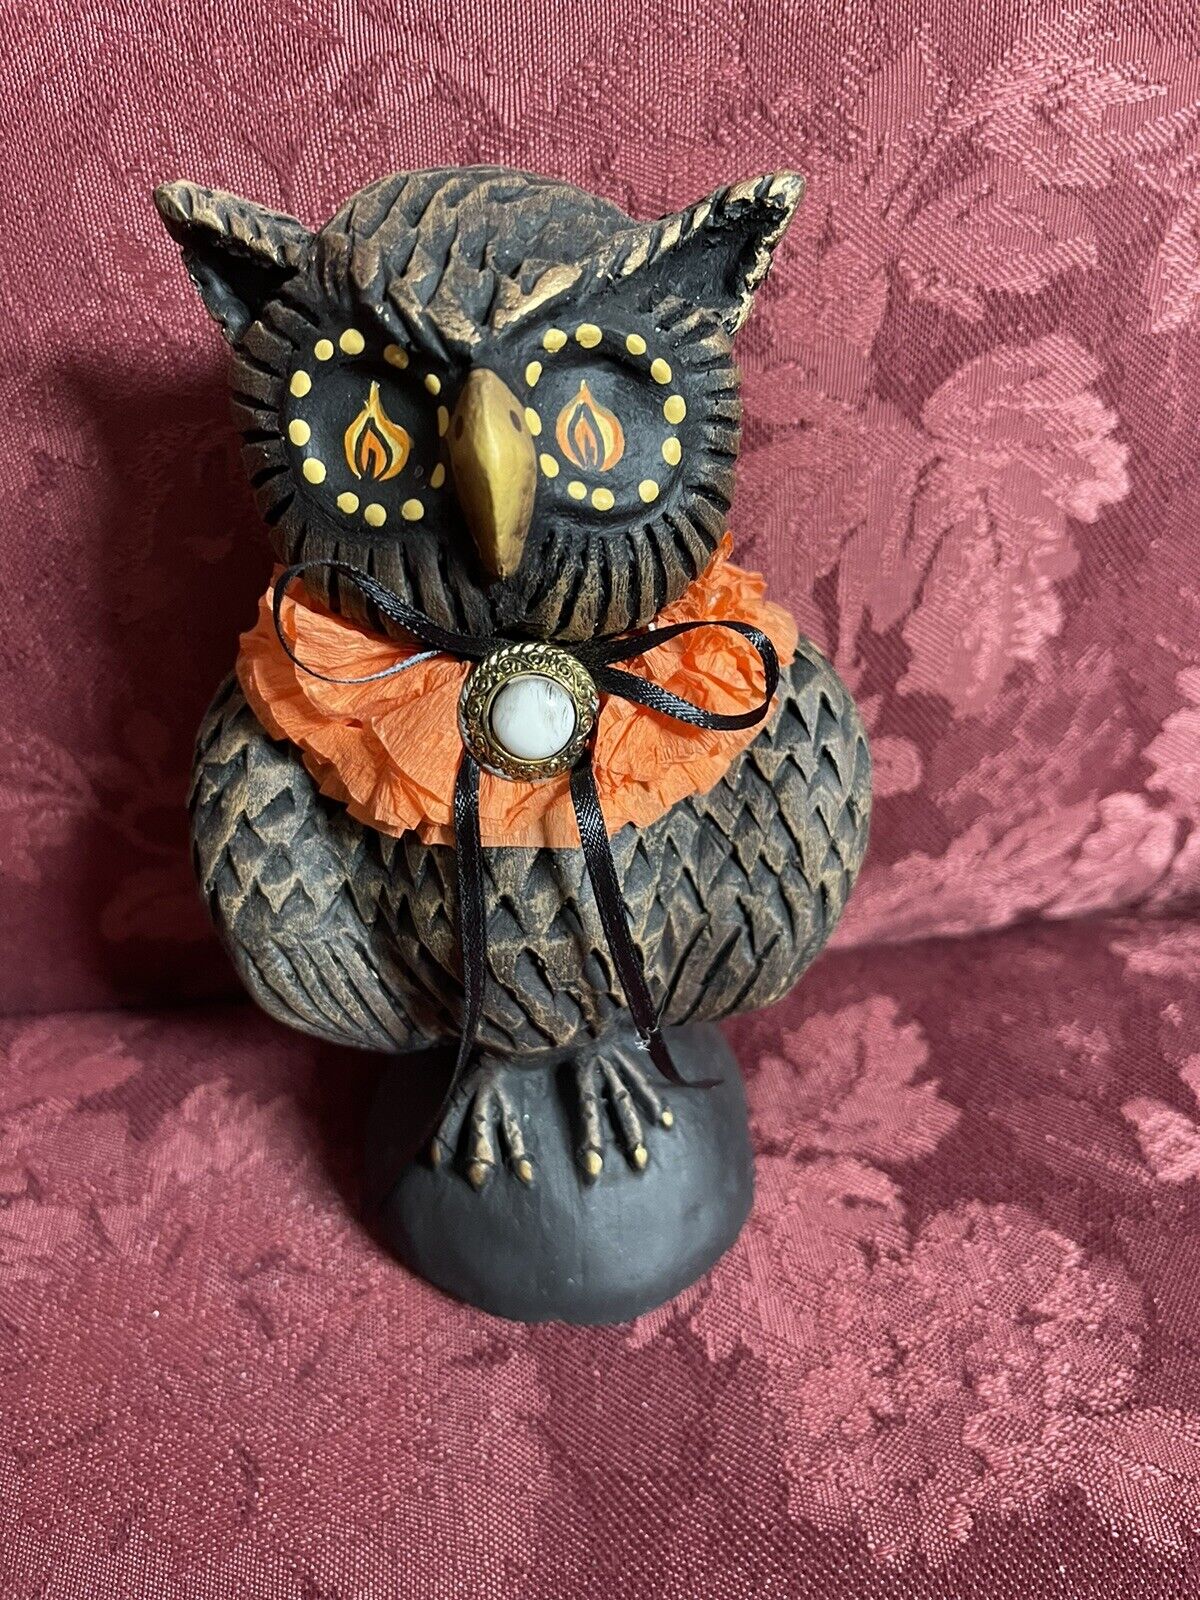 Halloween Owl 2018 Designed By Charles R Mc Clenning